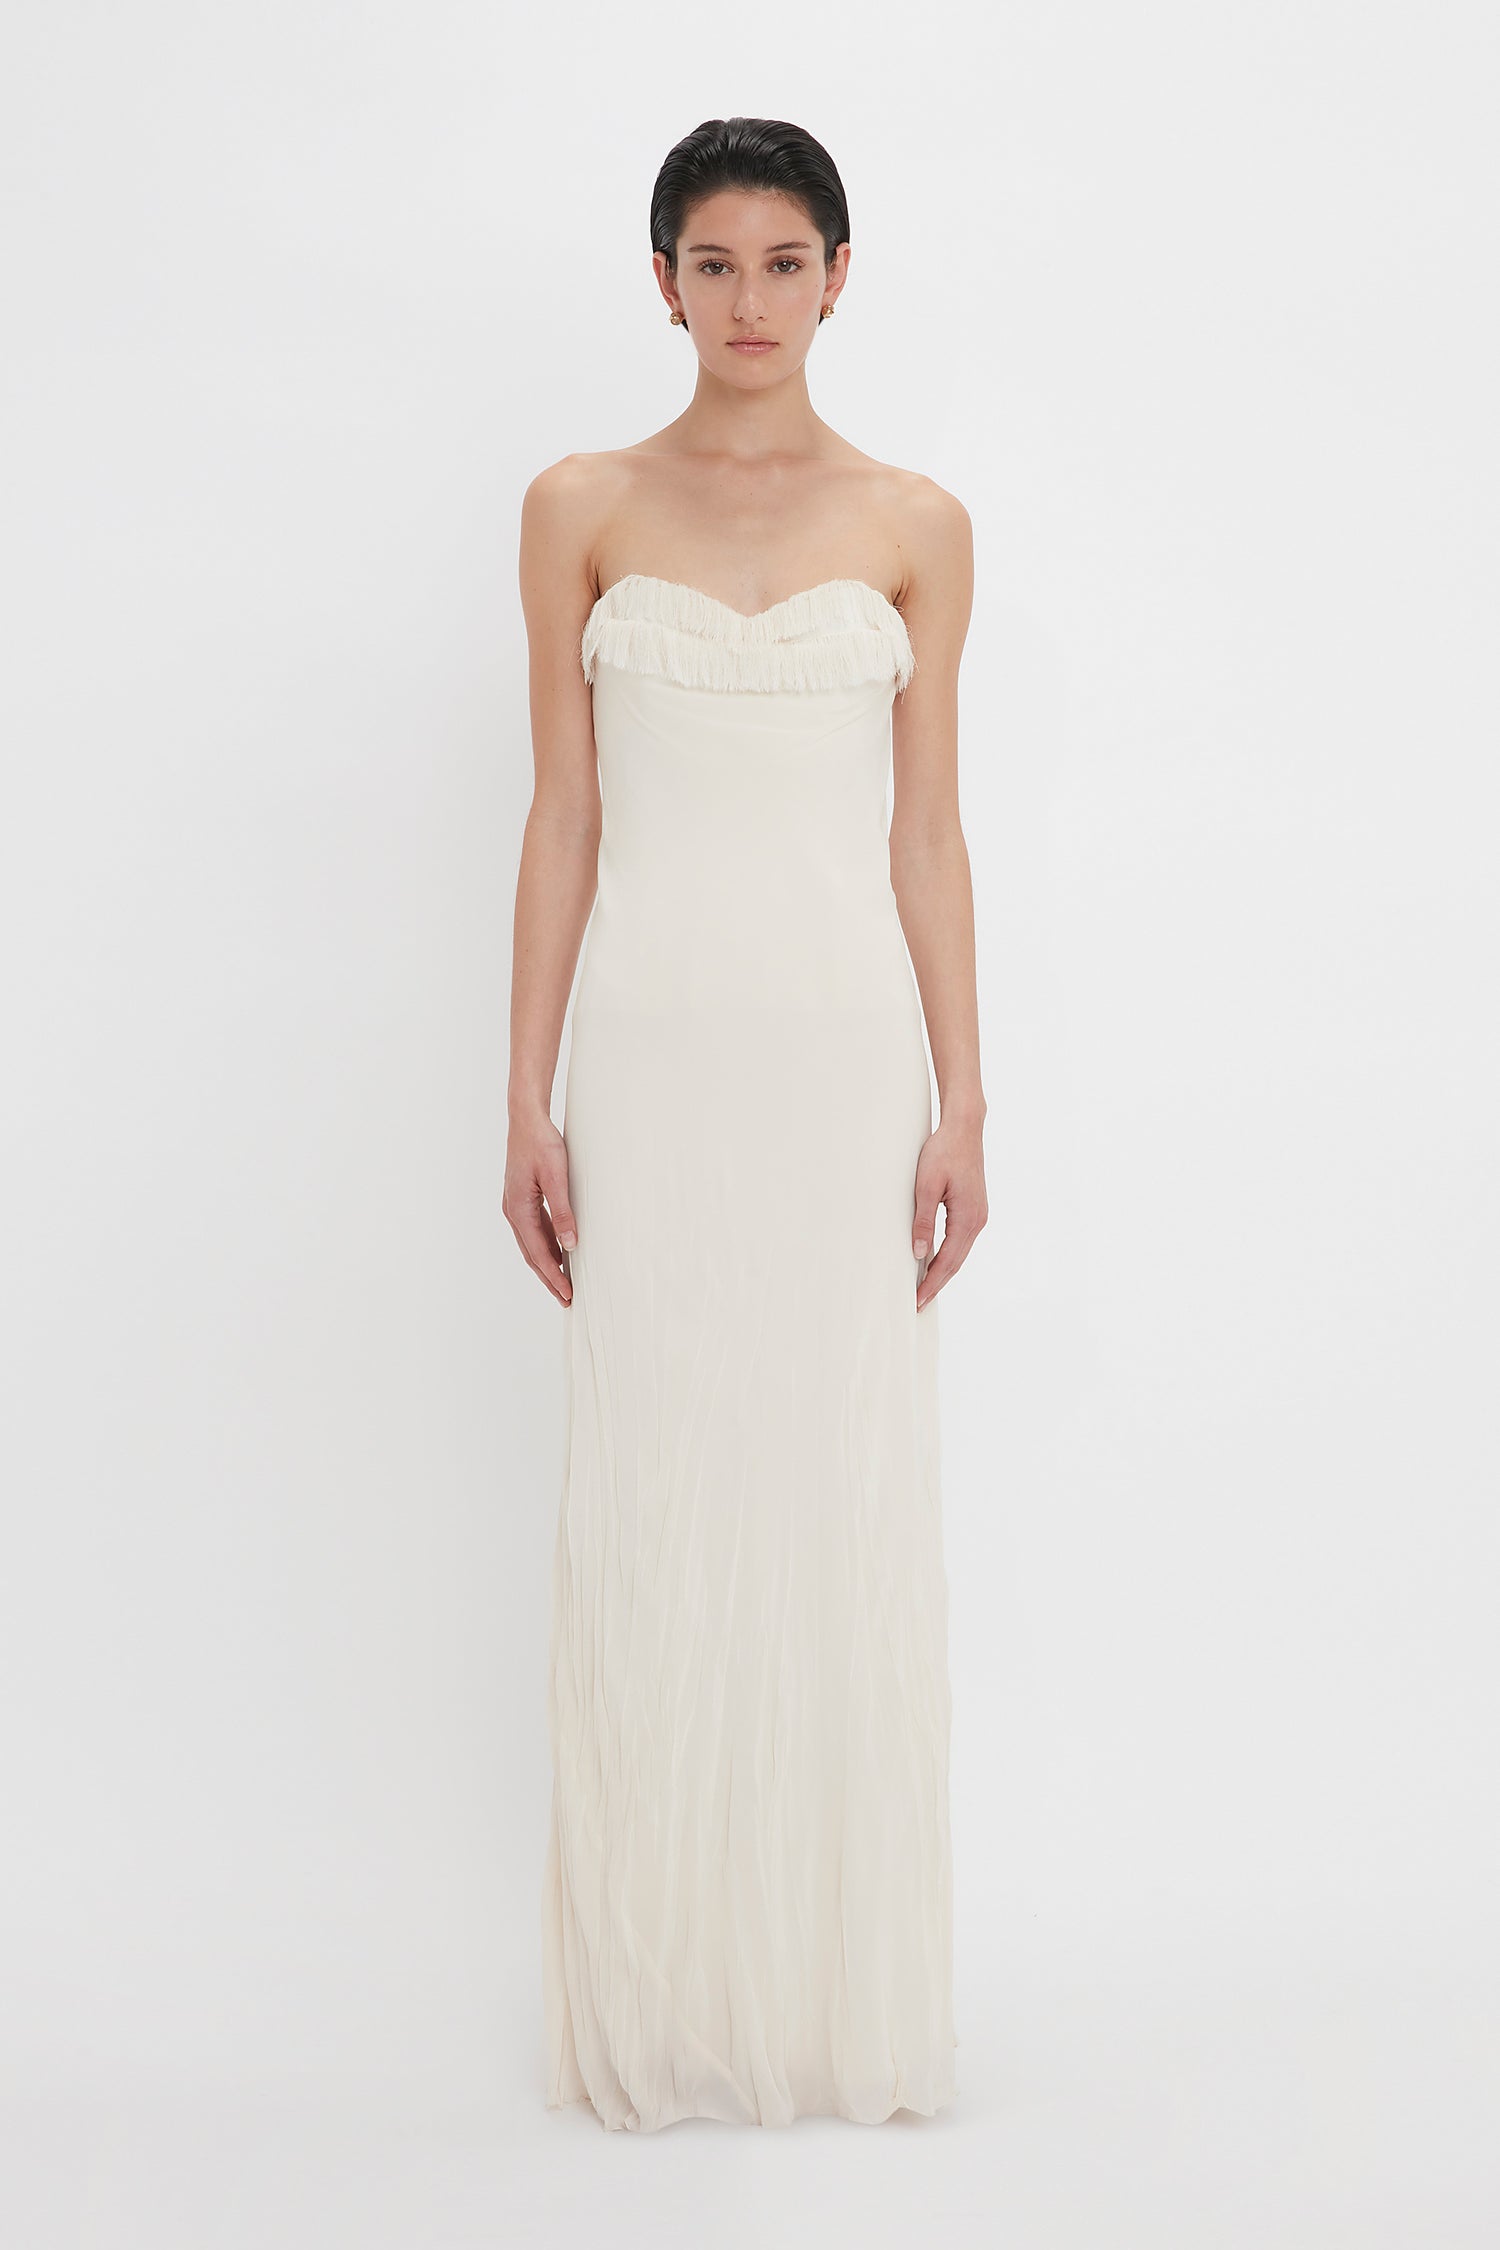 A woman stands facing the camera, wearing an elegant strapless cream gown with a softly pleated bust and a long, flowing crease-effect skirt by Victoria Beckham.